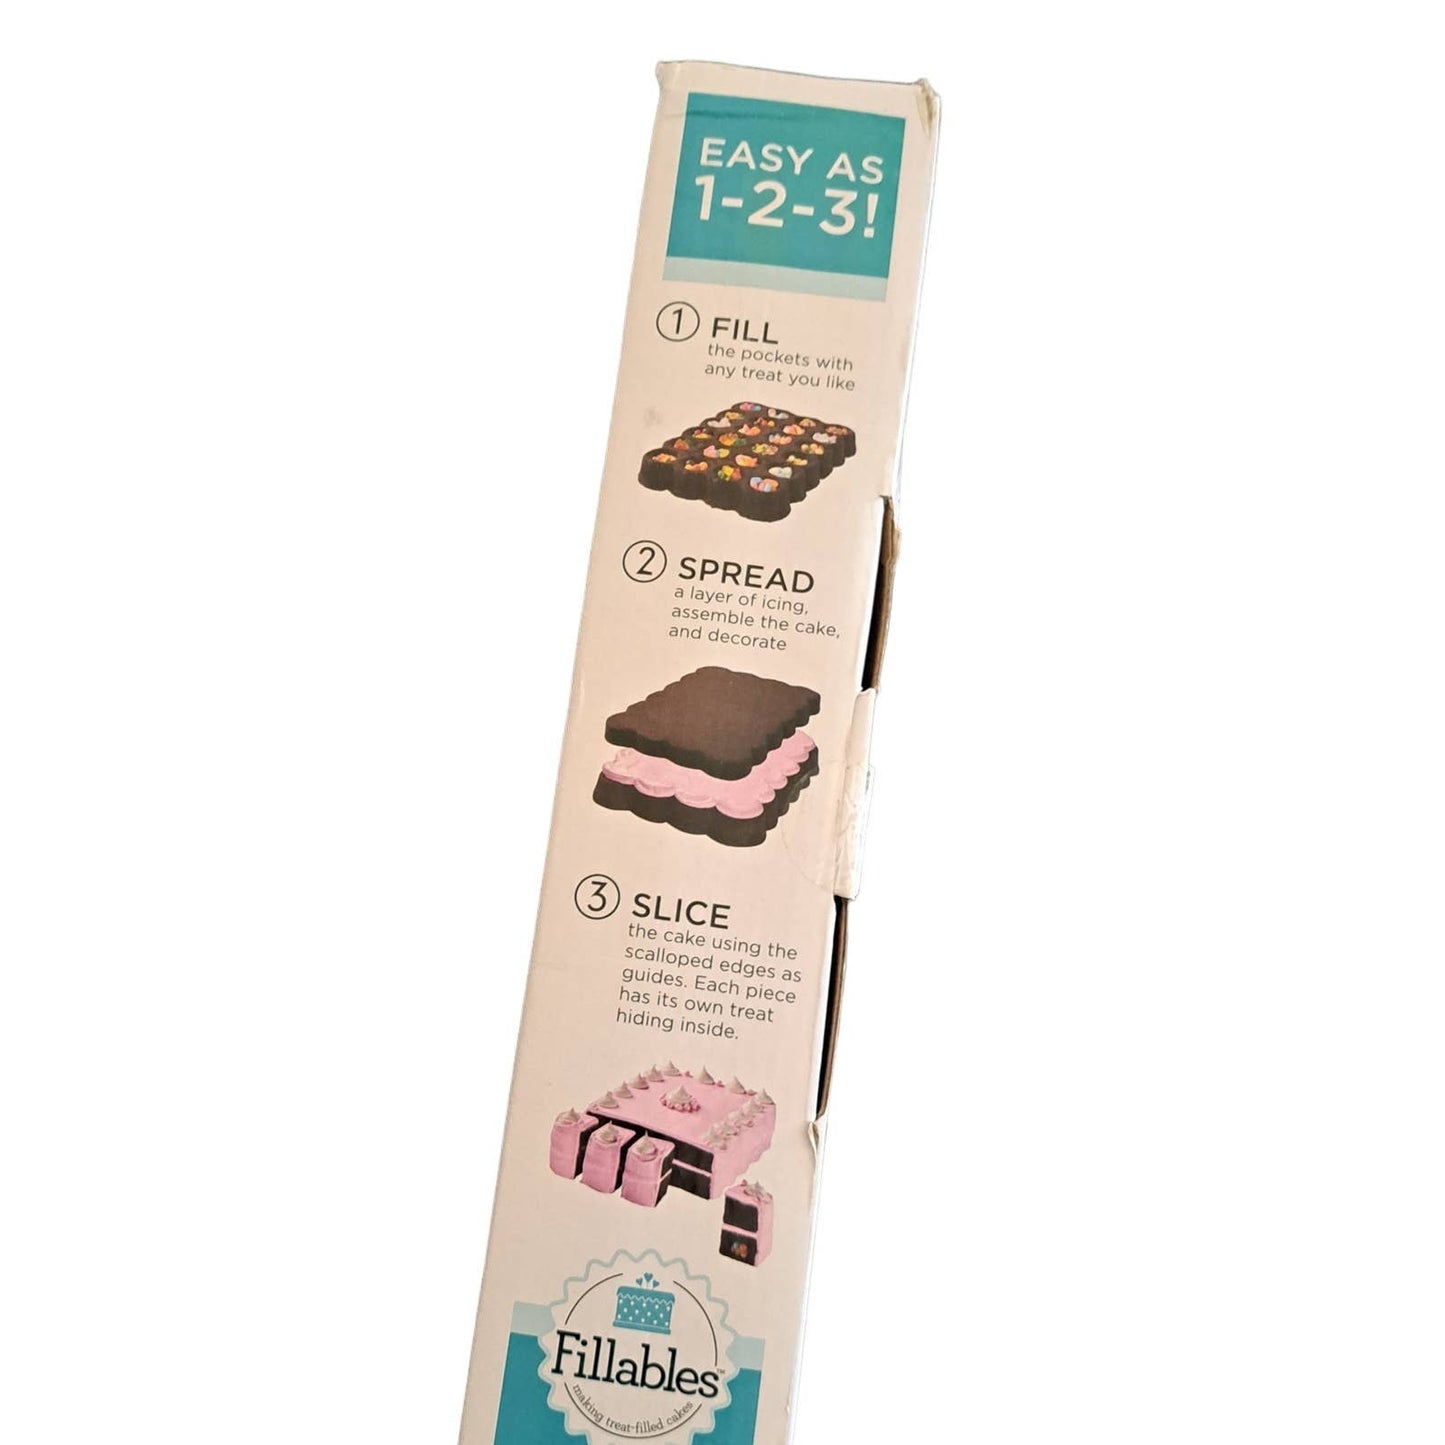 NIB- Bakers Advantage LG FILLABLES 2 pans for treat Filled Cakes